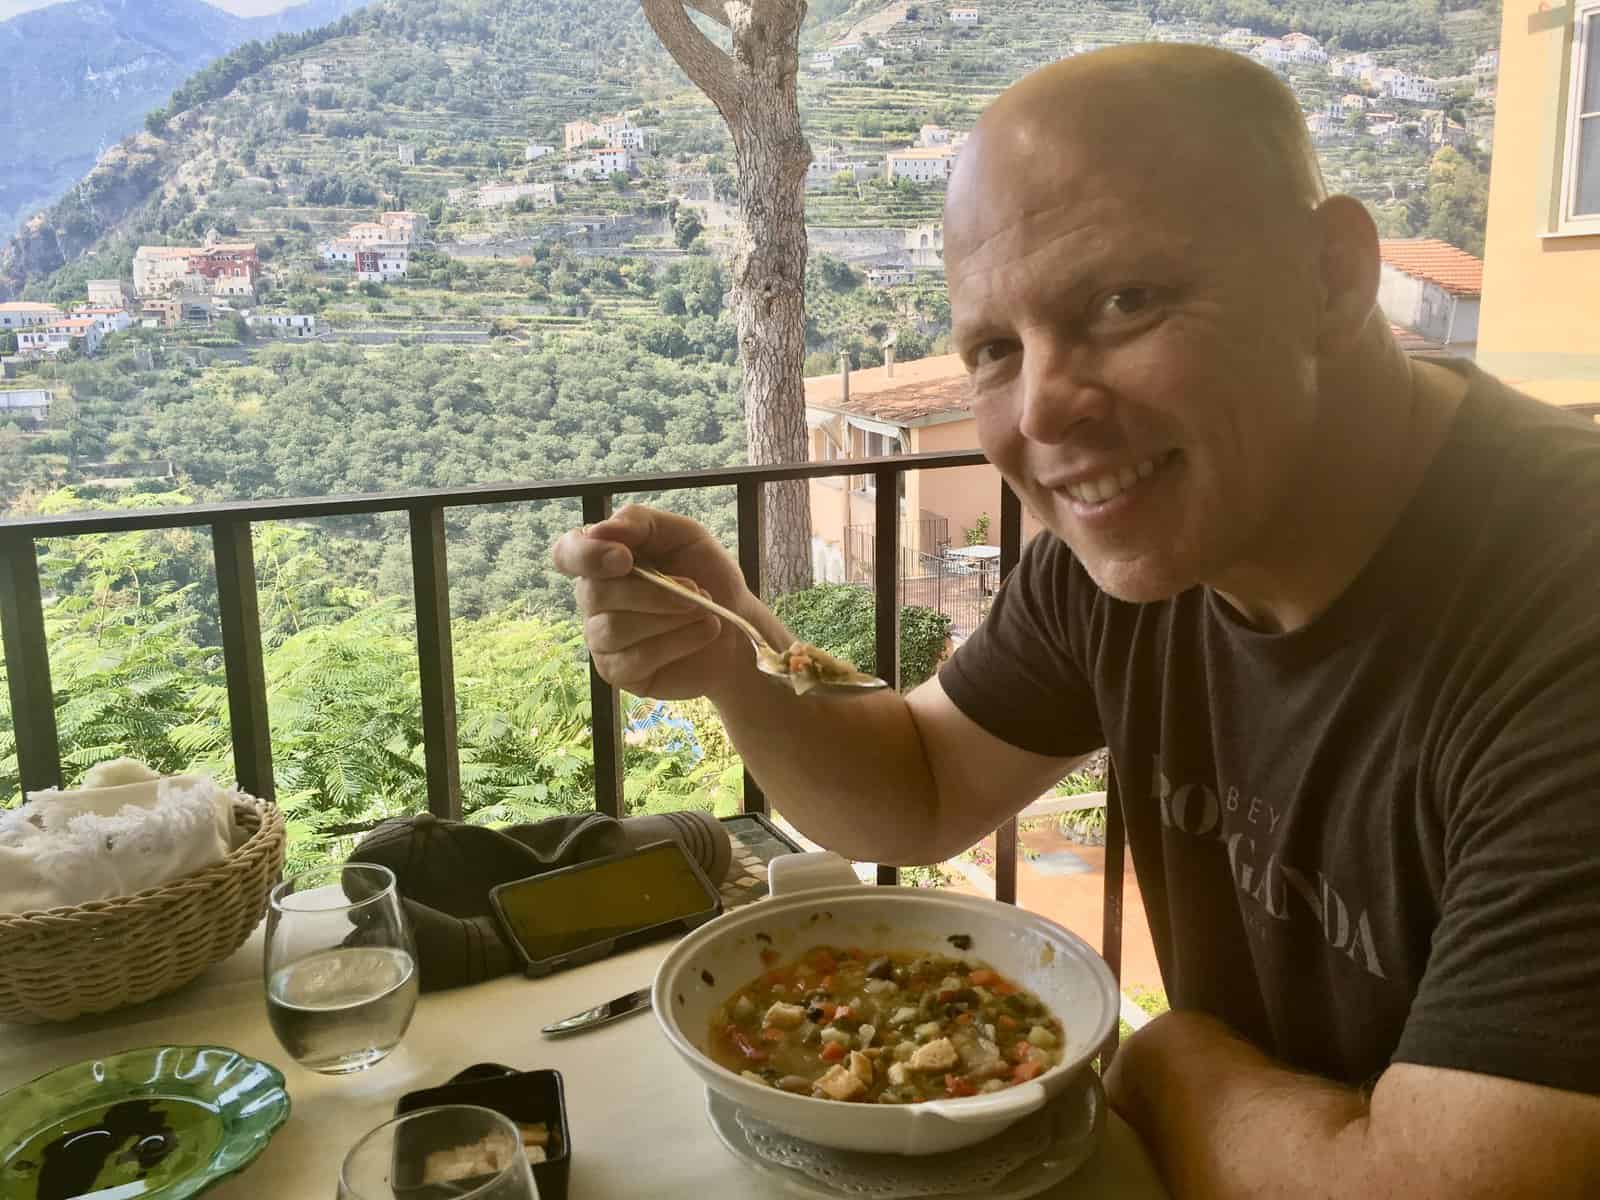 Dave eating gluten-free Italian soup with terraced gardens in the background